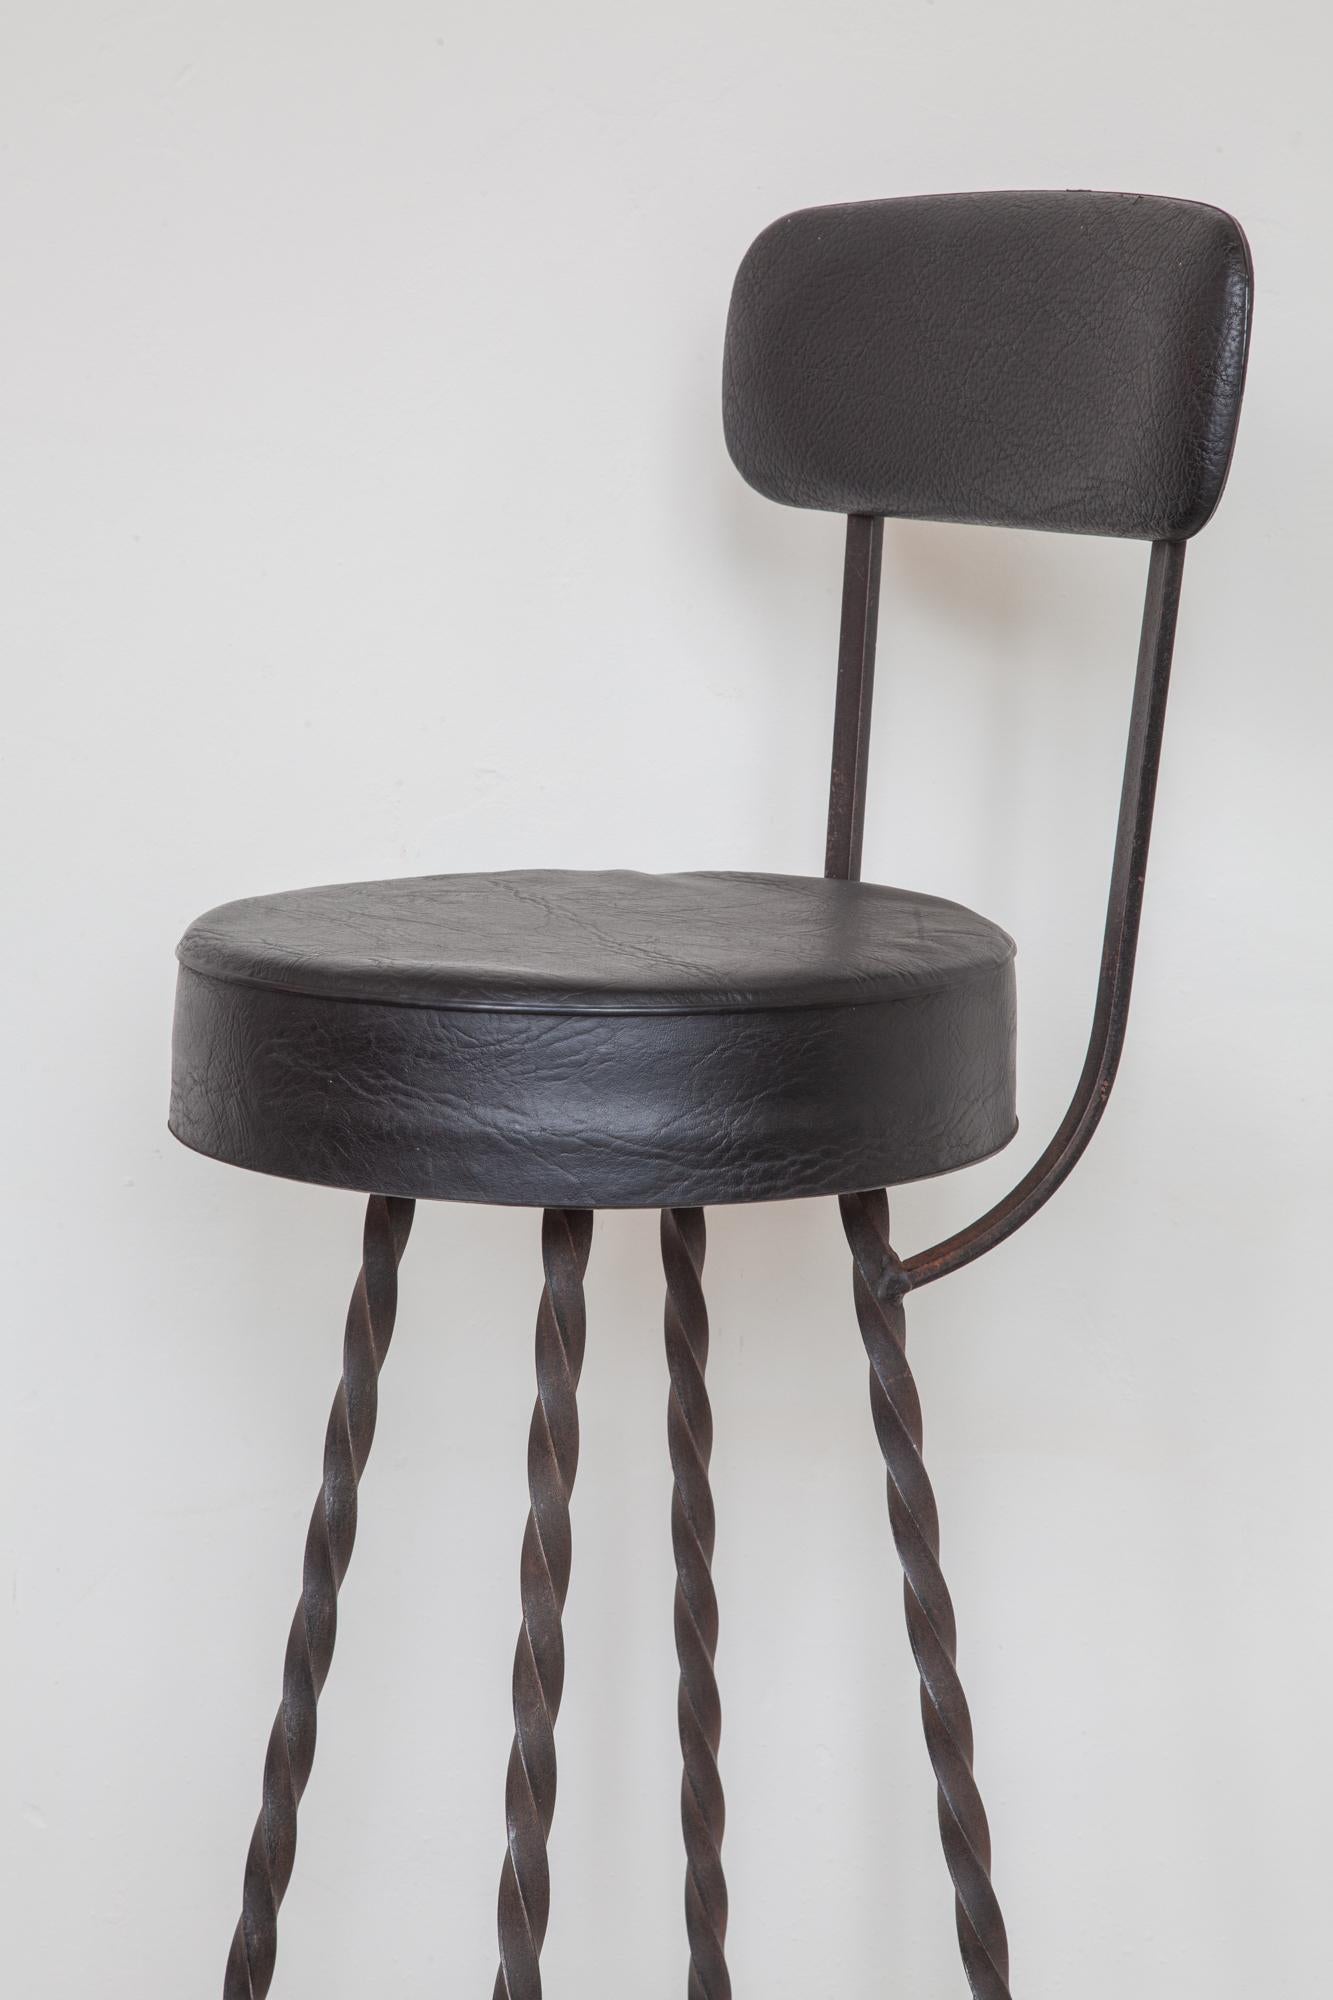 Hand-Crafted Brutalist Style Set of Four Wrought Iron Bar Stools Made in 1970S, FRANCE